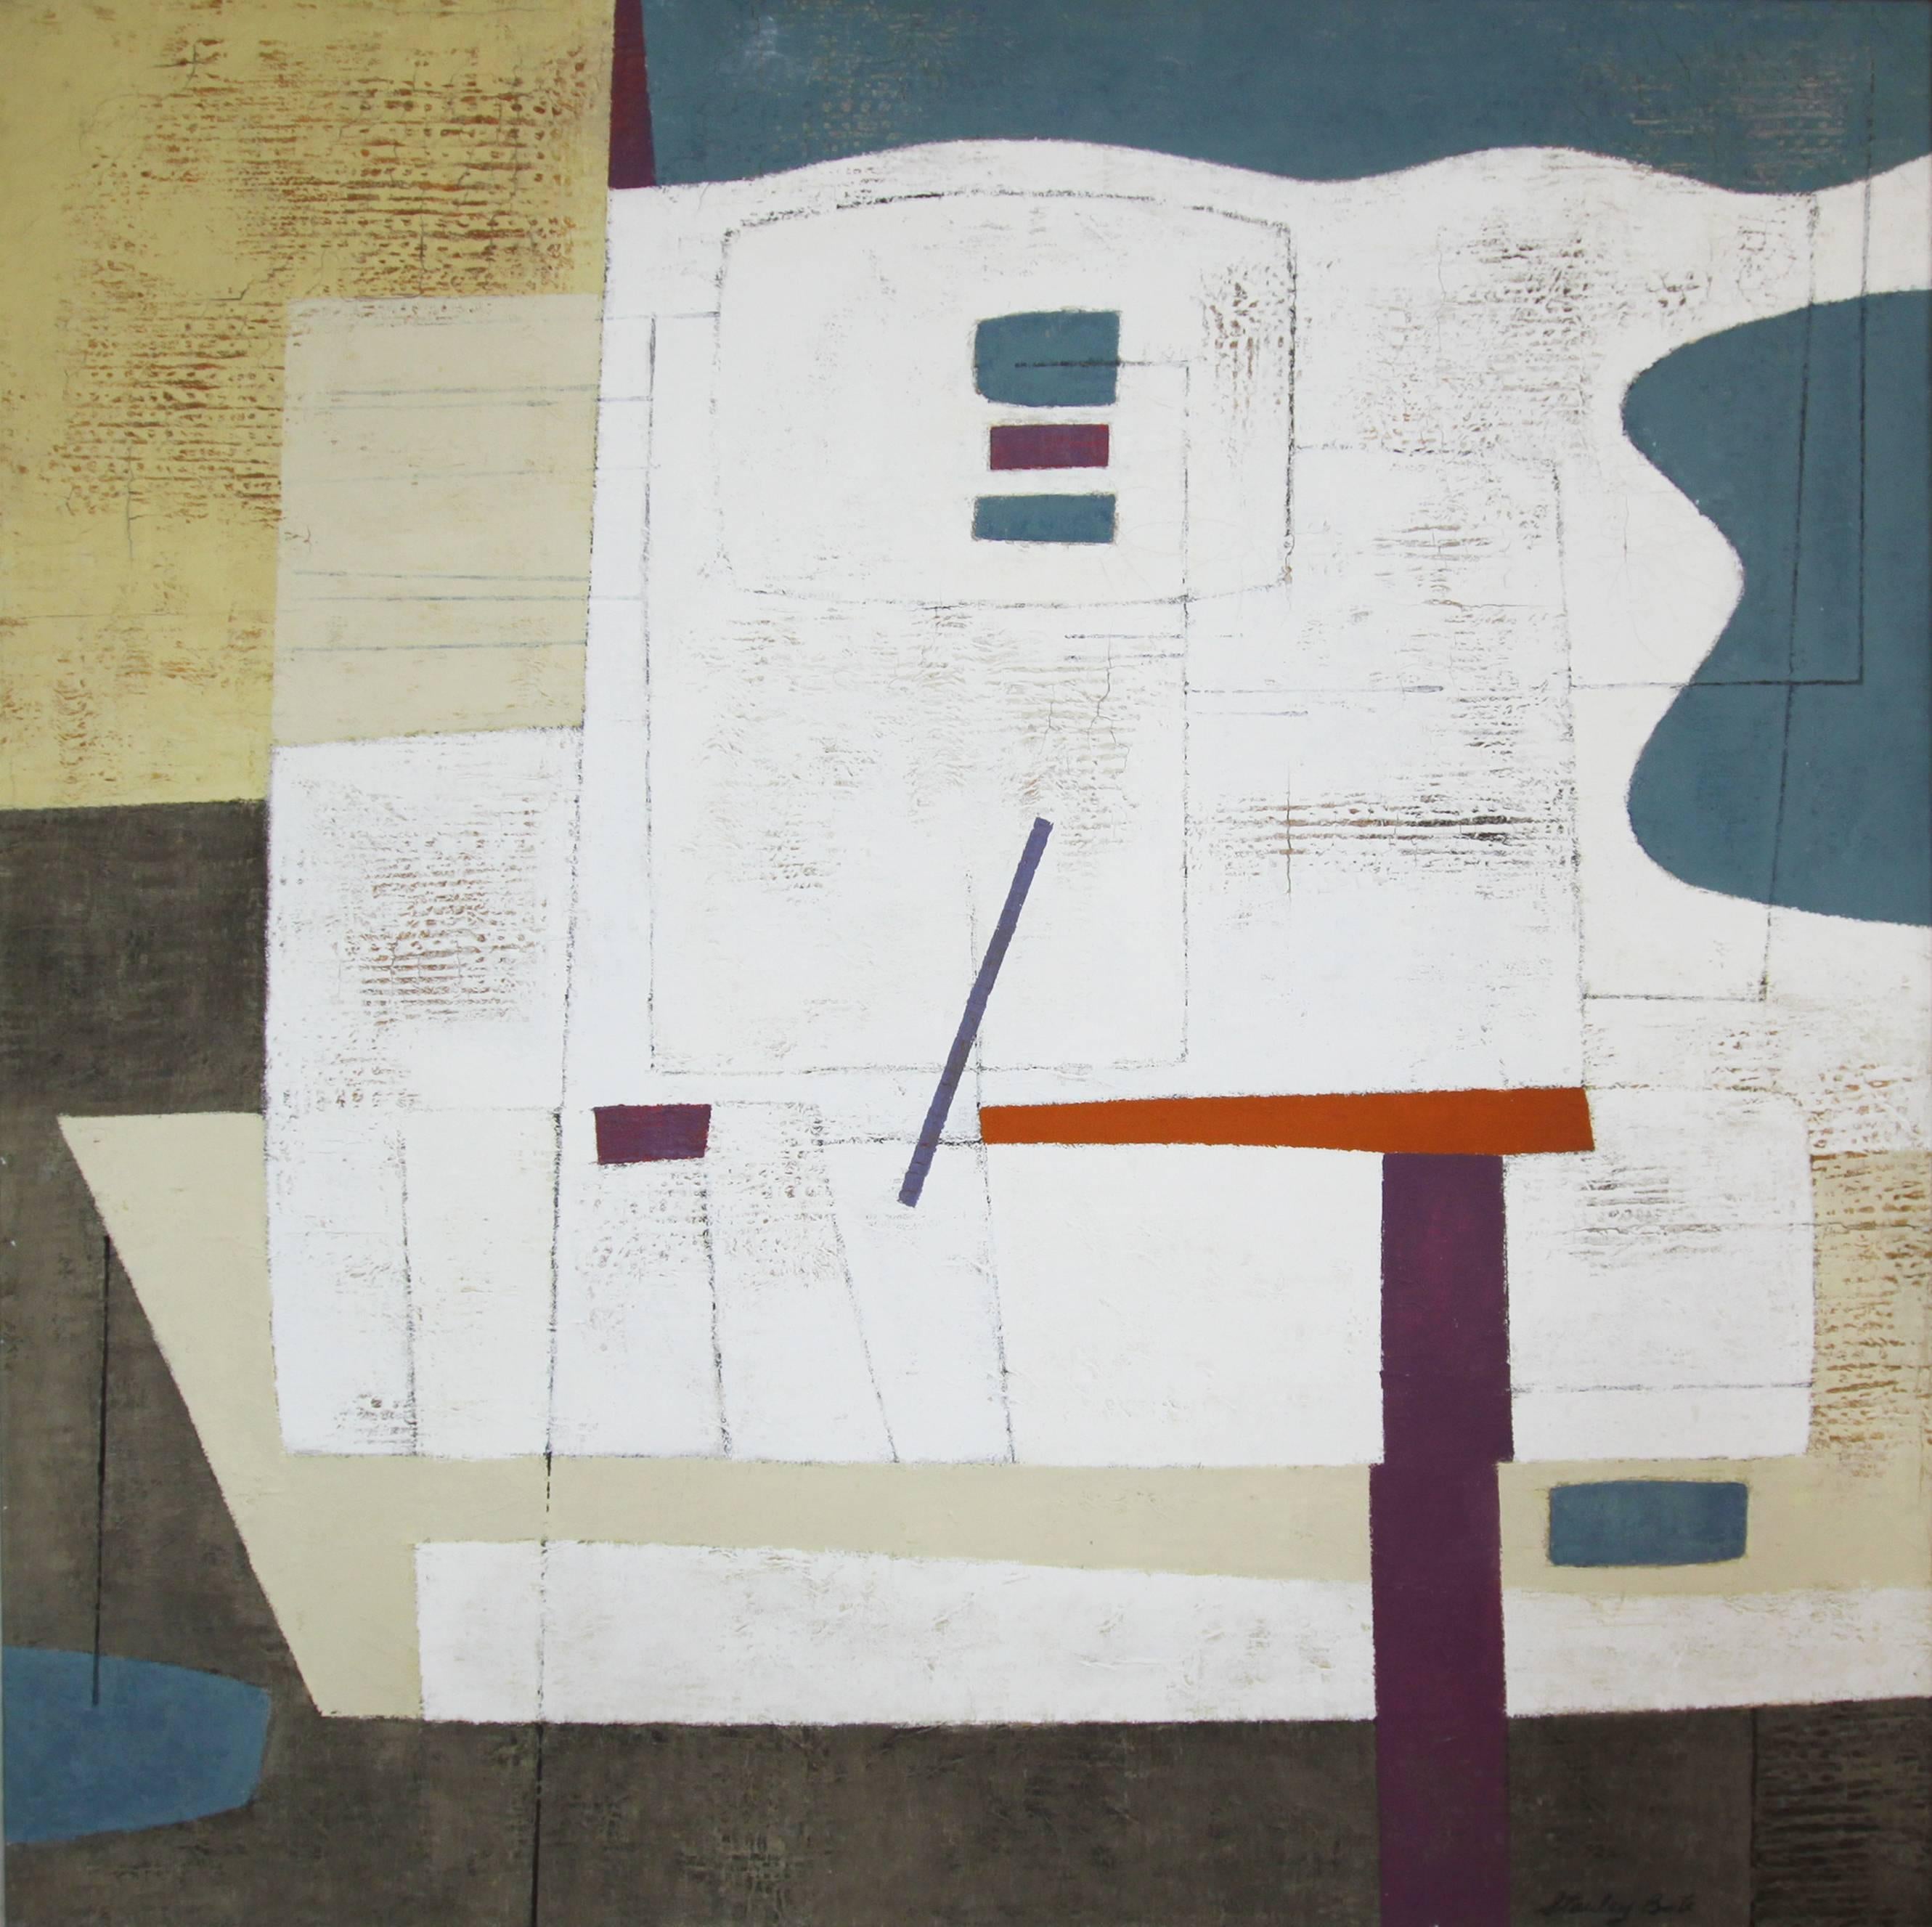 "Zuen" by Stanley Bate is a Modern abstract painting made in 1951, featuring geometric shapes, line work, and light blue shapes complemented by pops of muted yellow, red, deep eggplant and earthy green. Zuen is framed in a white wood floater frame,